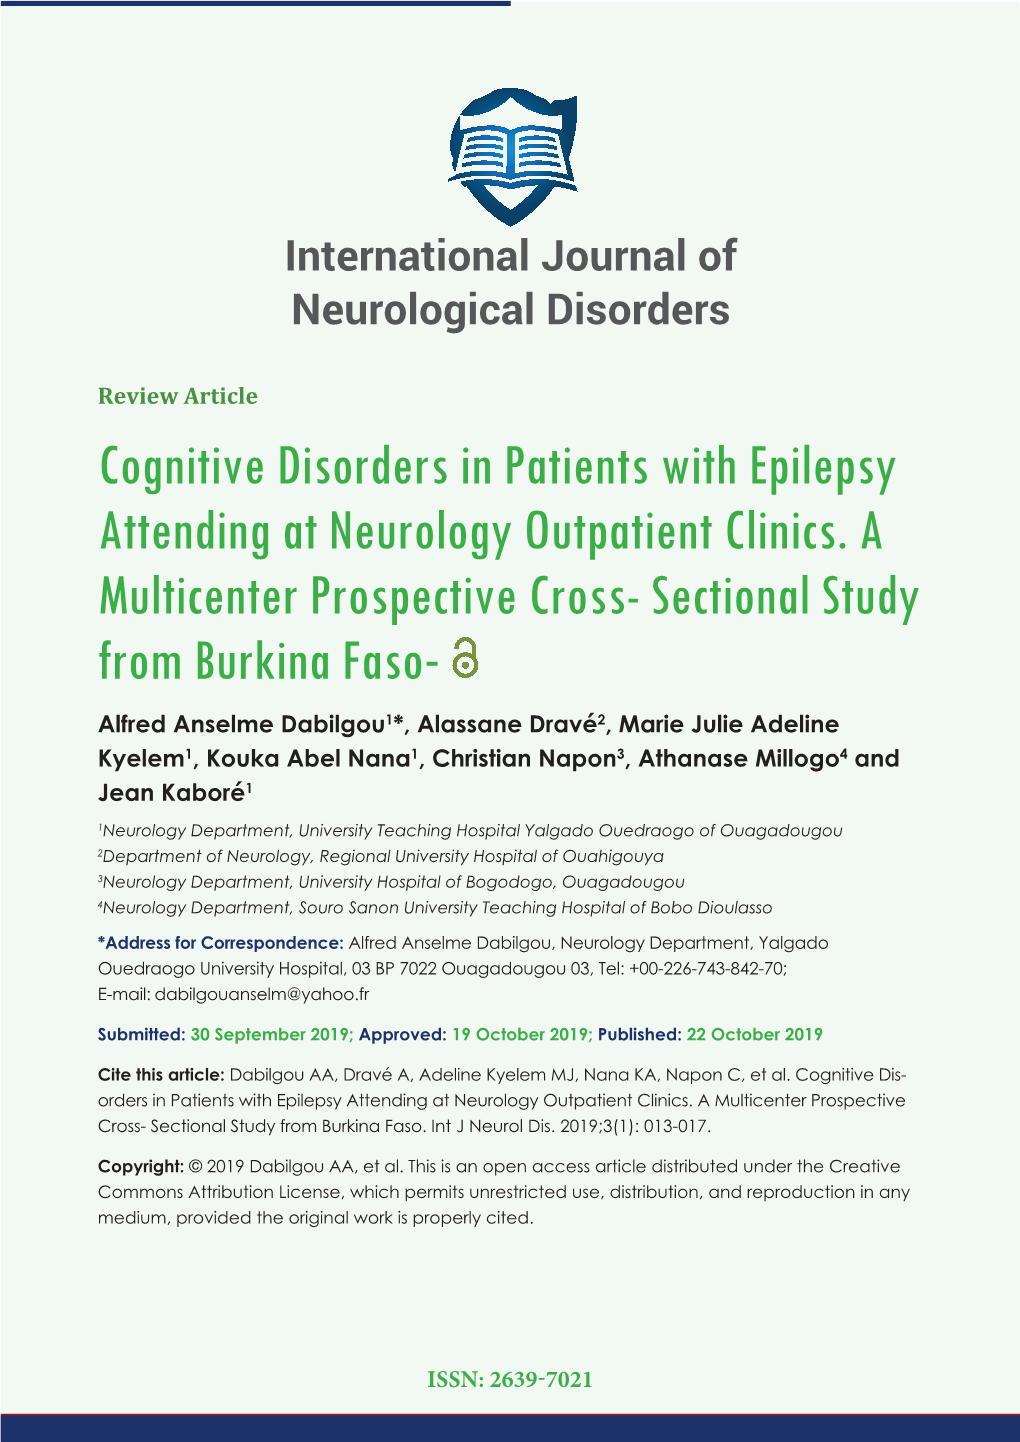 Cognitive Disorders in Patients with Epilepsy Attending at Neurology Outpatient Clinics